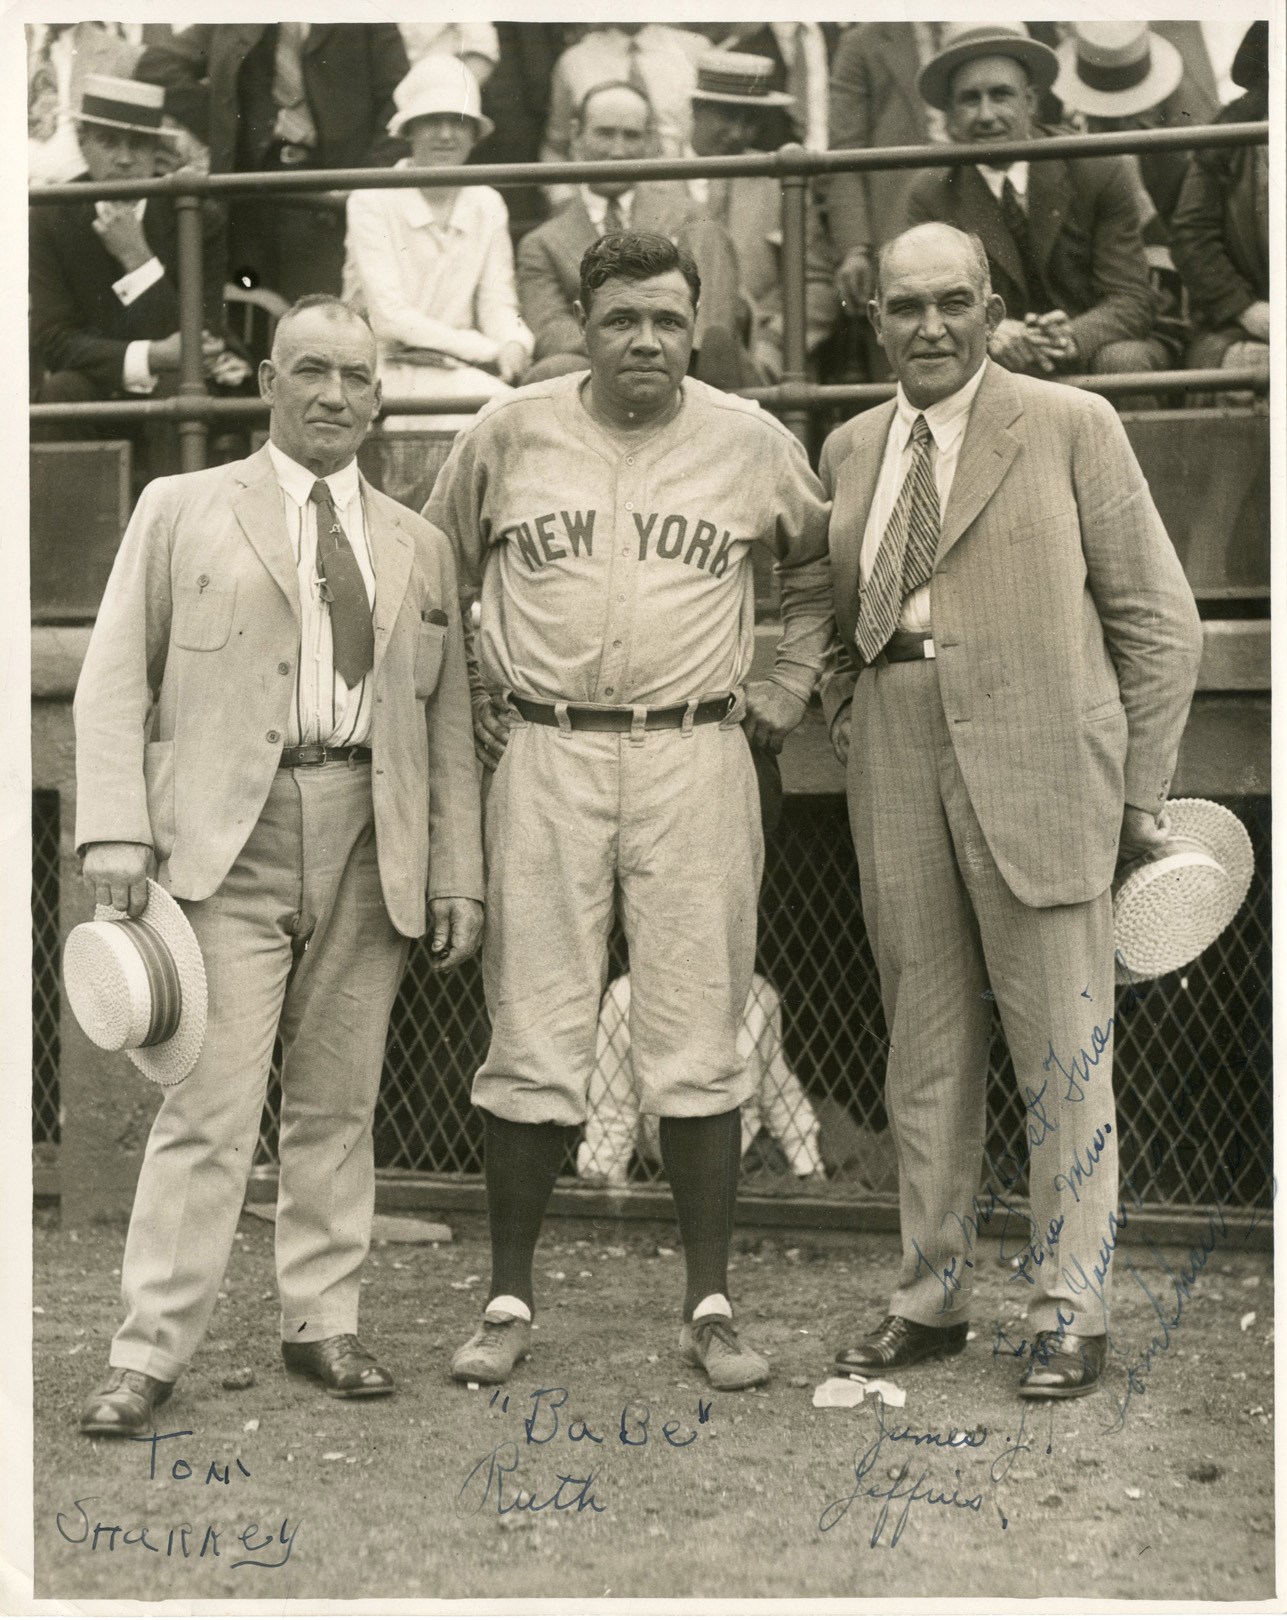 Ruth and Gehrig - 1920s Tom Sharkey with Babe Ruth & Jim Jeffries Signed Photo to His Wife's Best Friend (PSA)